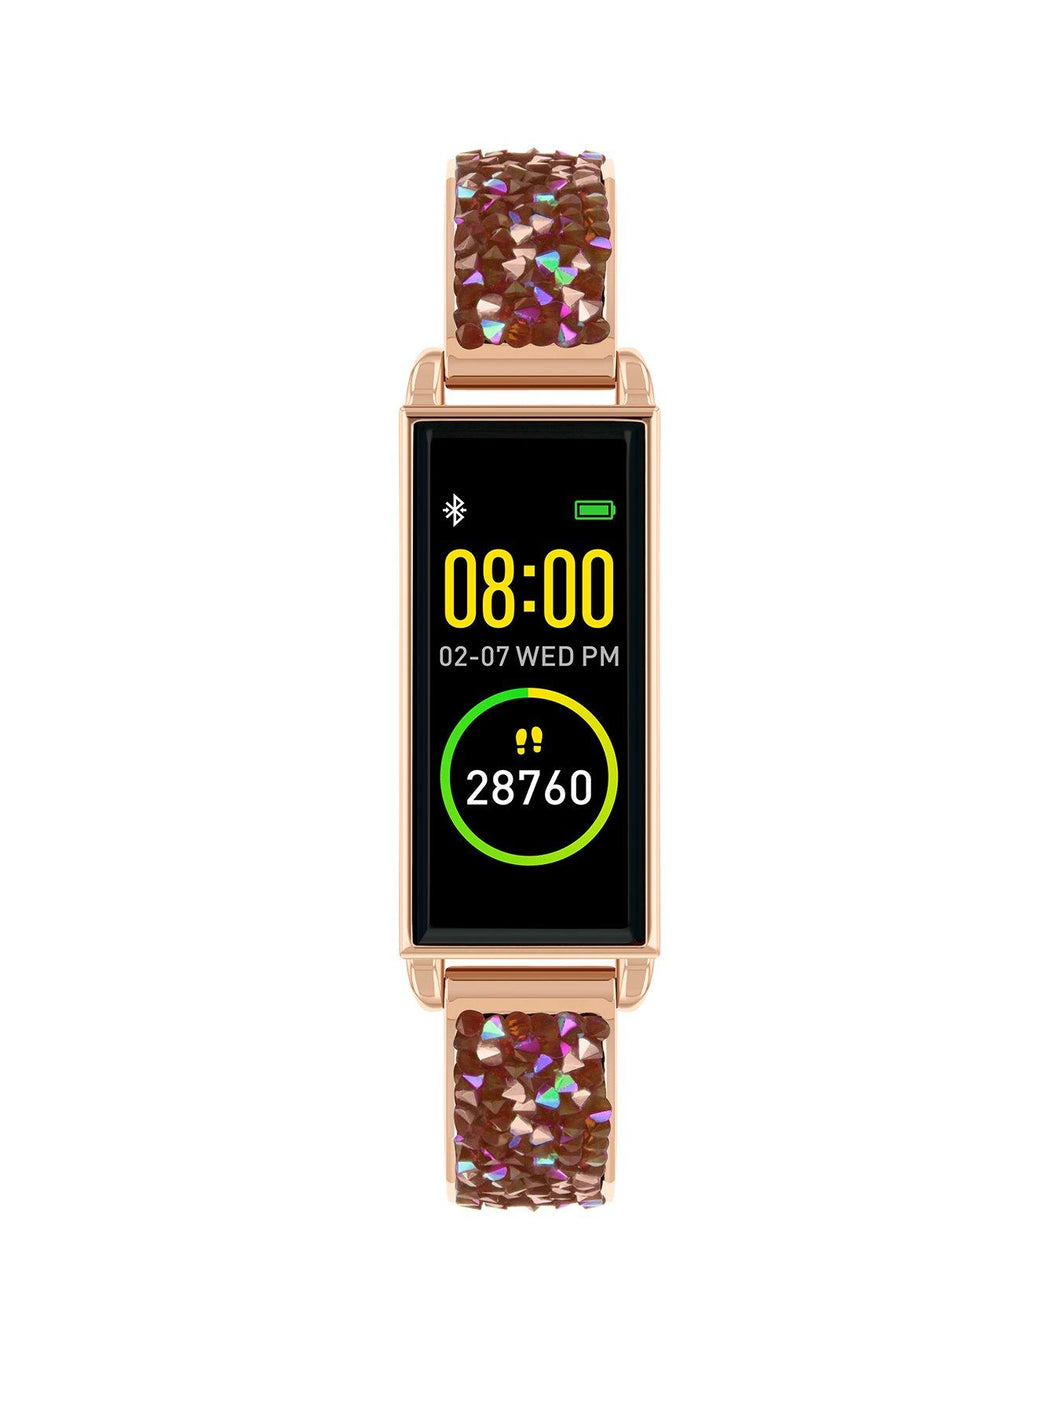 Reflex Active Series 2 Smart Watch with Colour Touch Screen.